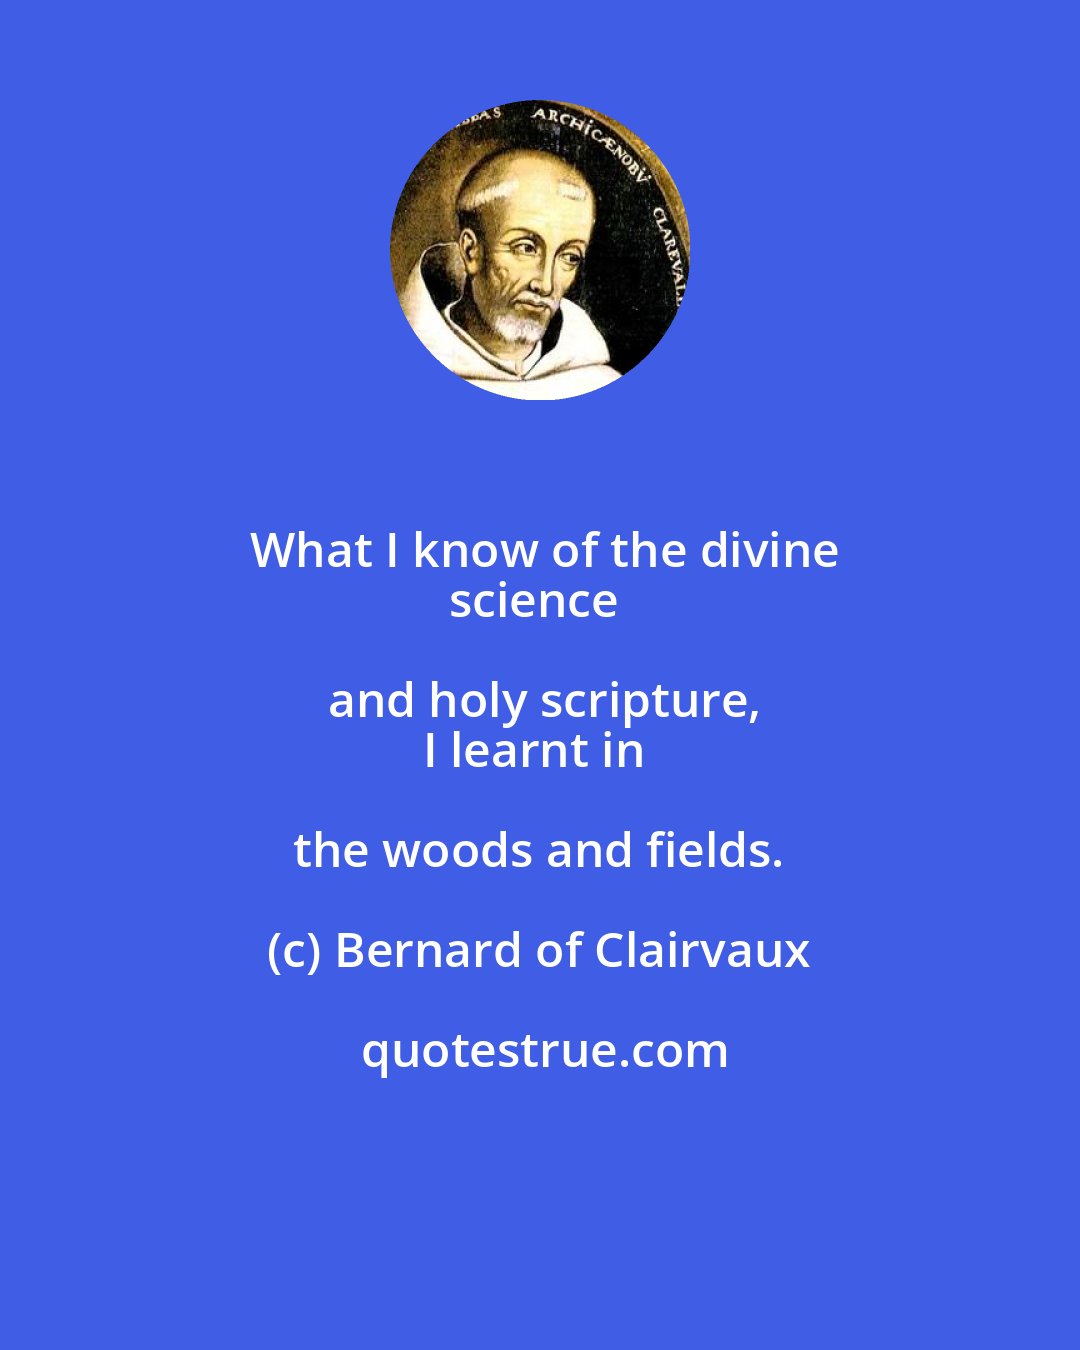 Bernard of Clairvaux: What I know of the divine
science and holy scripture,
I learnt in the woods and fields.